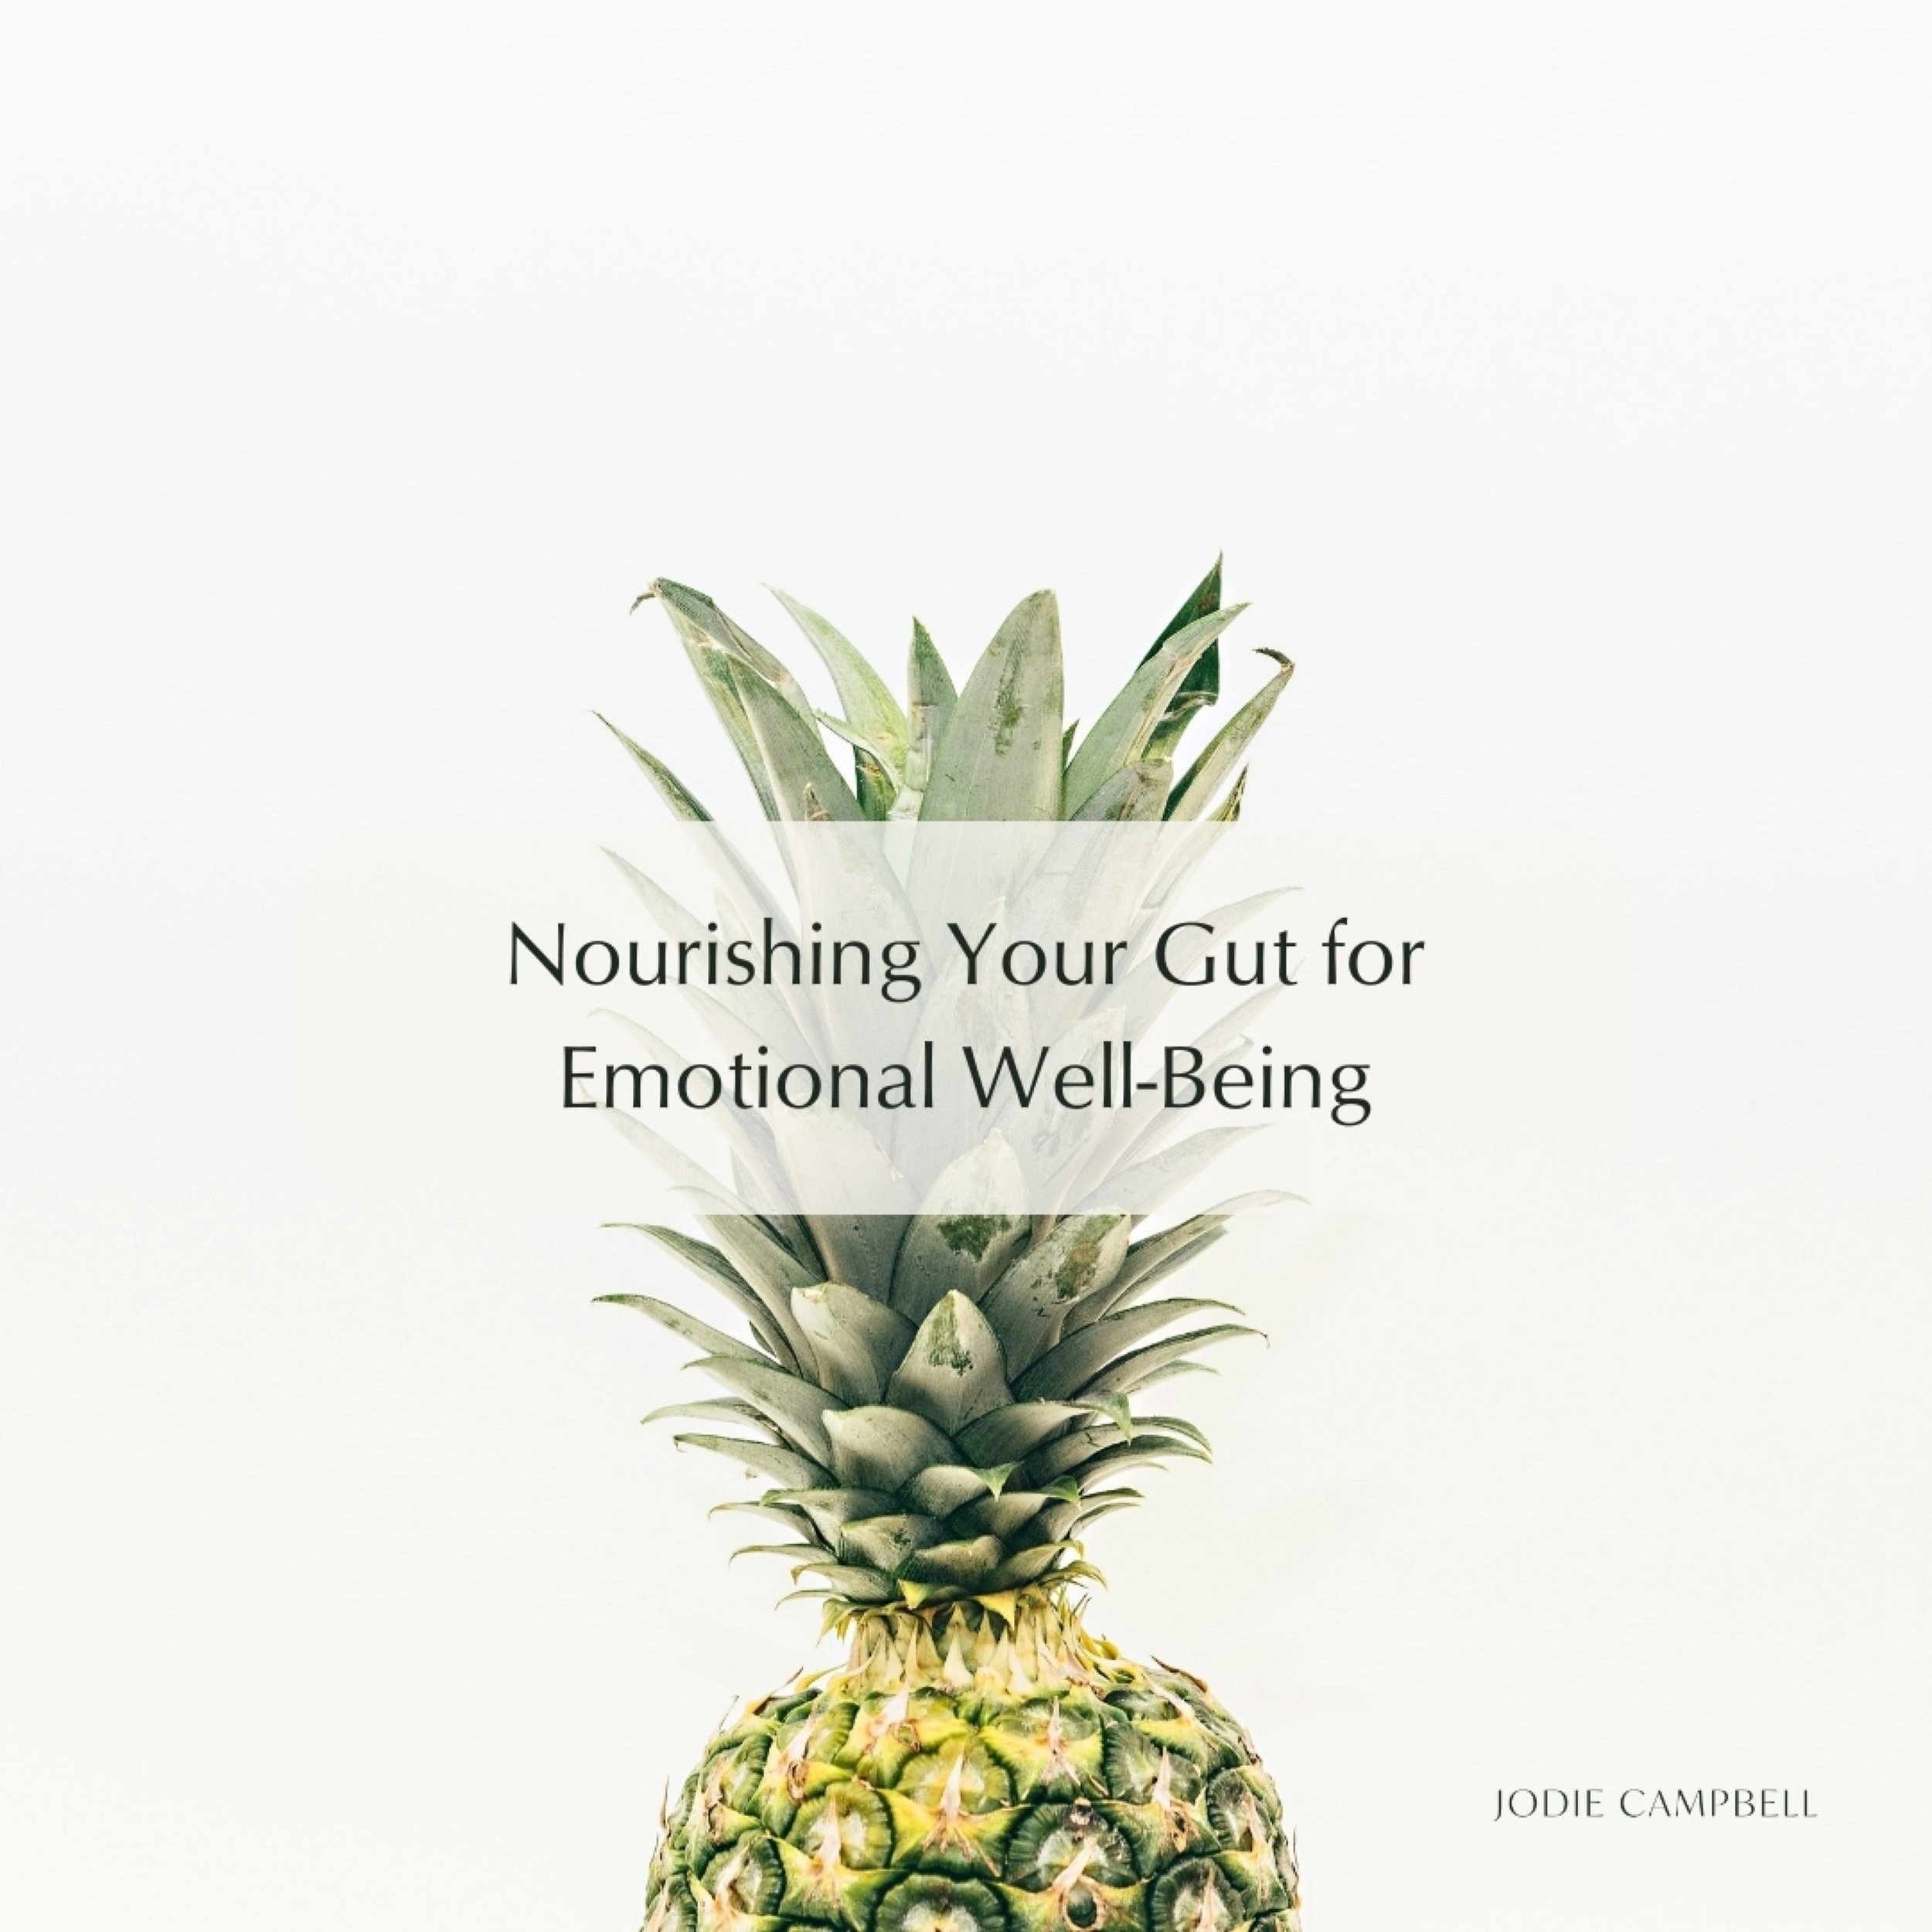 From overwhelmed to empowered is totally possible when nourishing your guts is done right!⁣

Are you grappling with IBS and deal with overwhelming emotions, social isolation, and fear due to a lack of understanding about the root cause and persistent